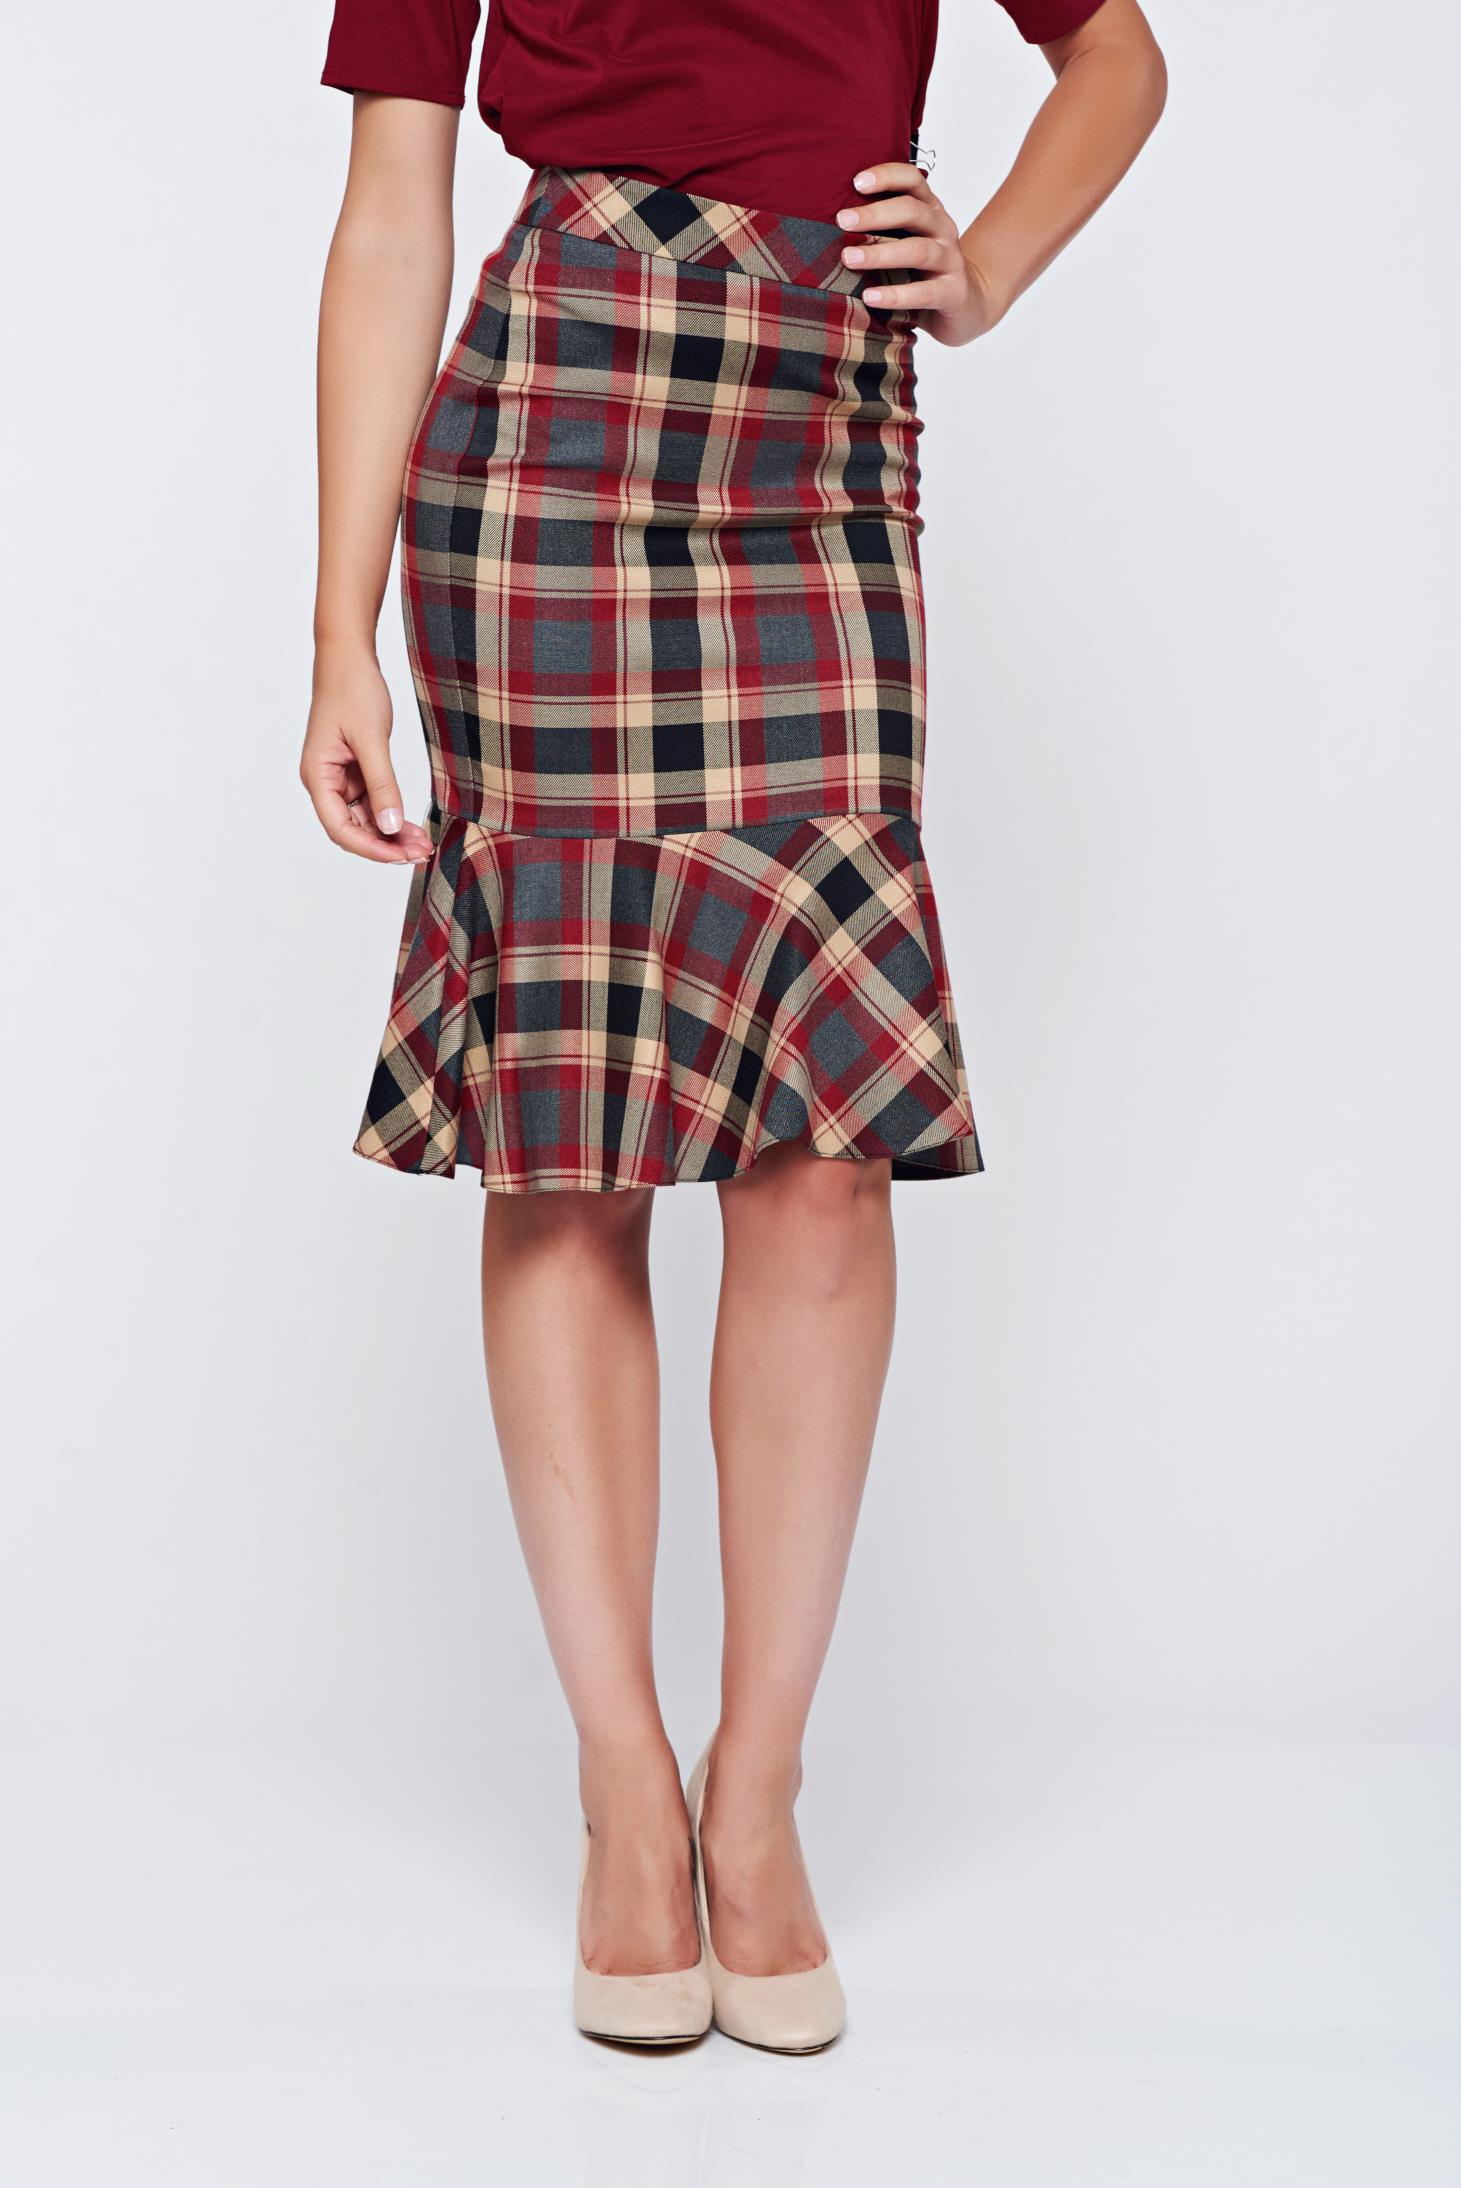 LaDonna office pencil plaid fabric with ruffle details red skirt 1 - StarShinerS.com